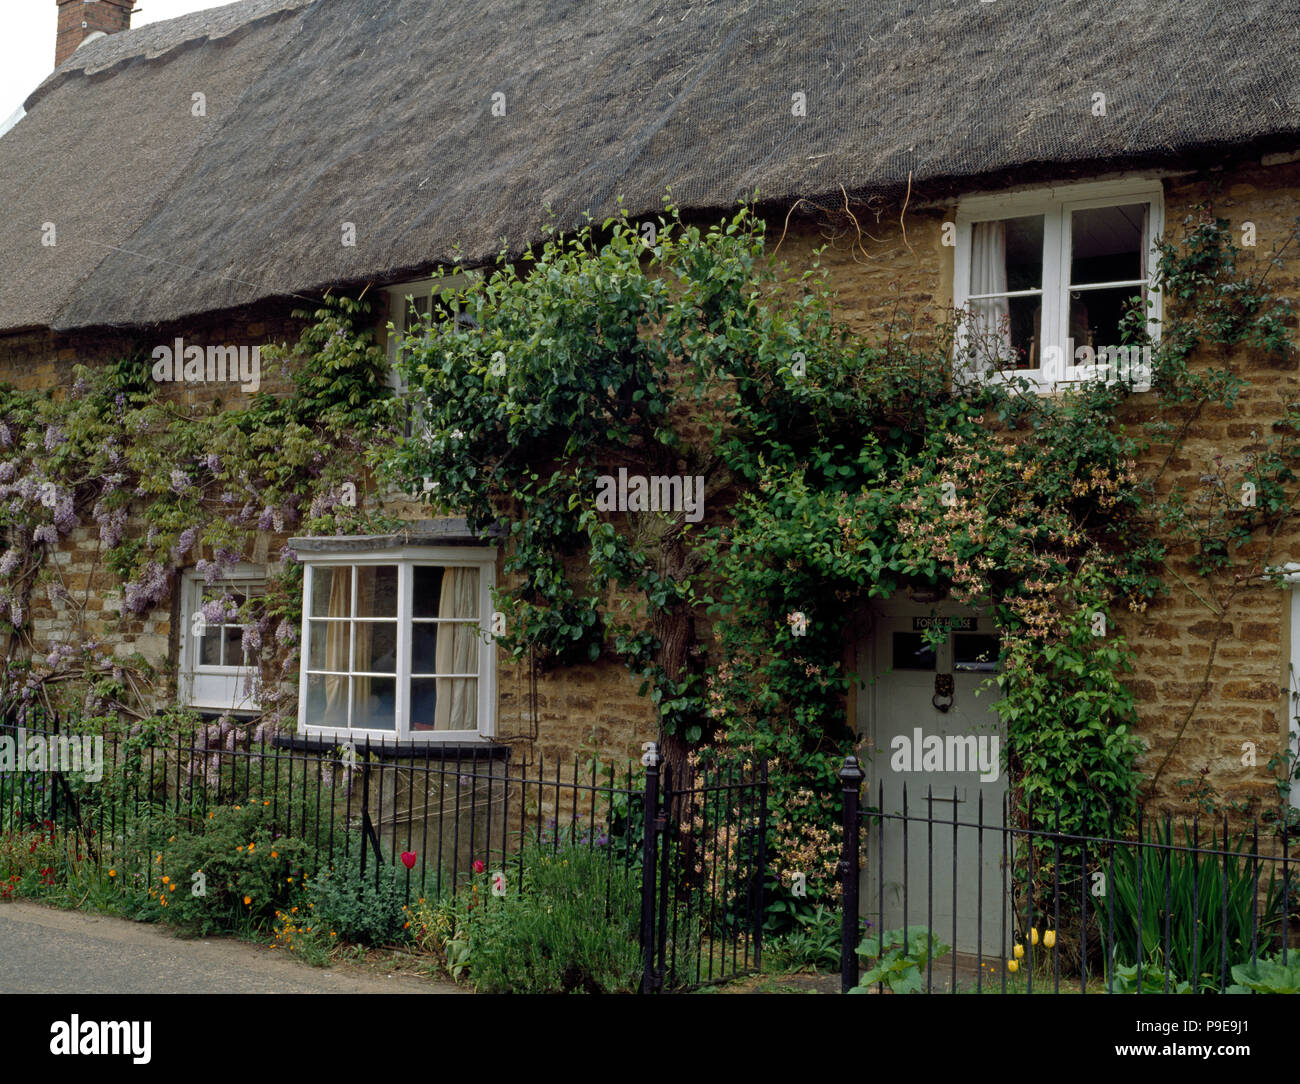 Exterior of a thatched stone cottage with honeysuckle around the front door Stock Photo